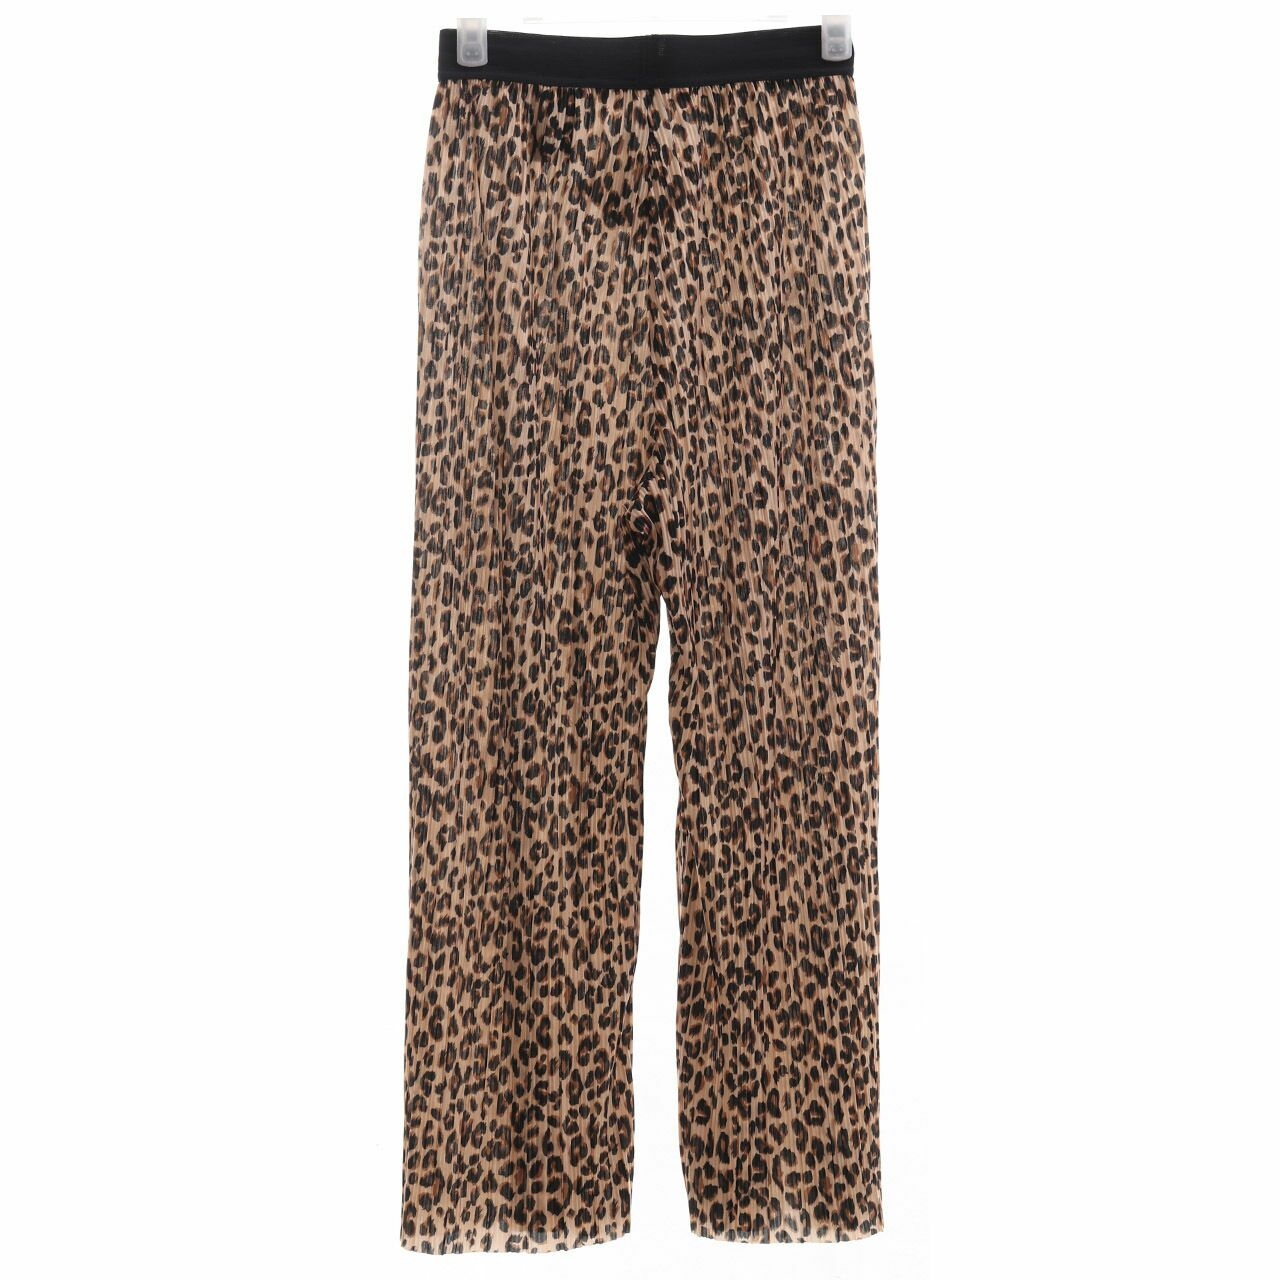 H&M Brown Leopard Trousers